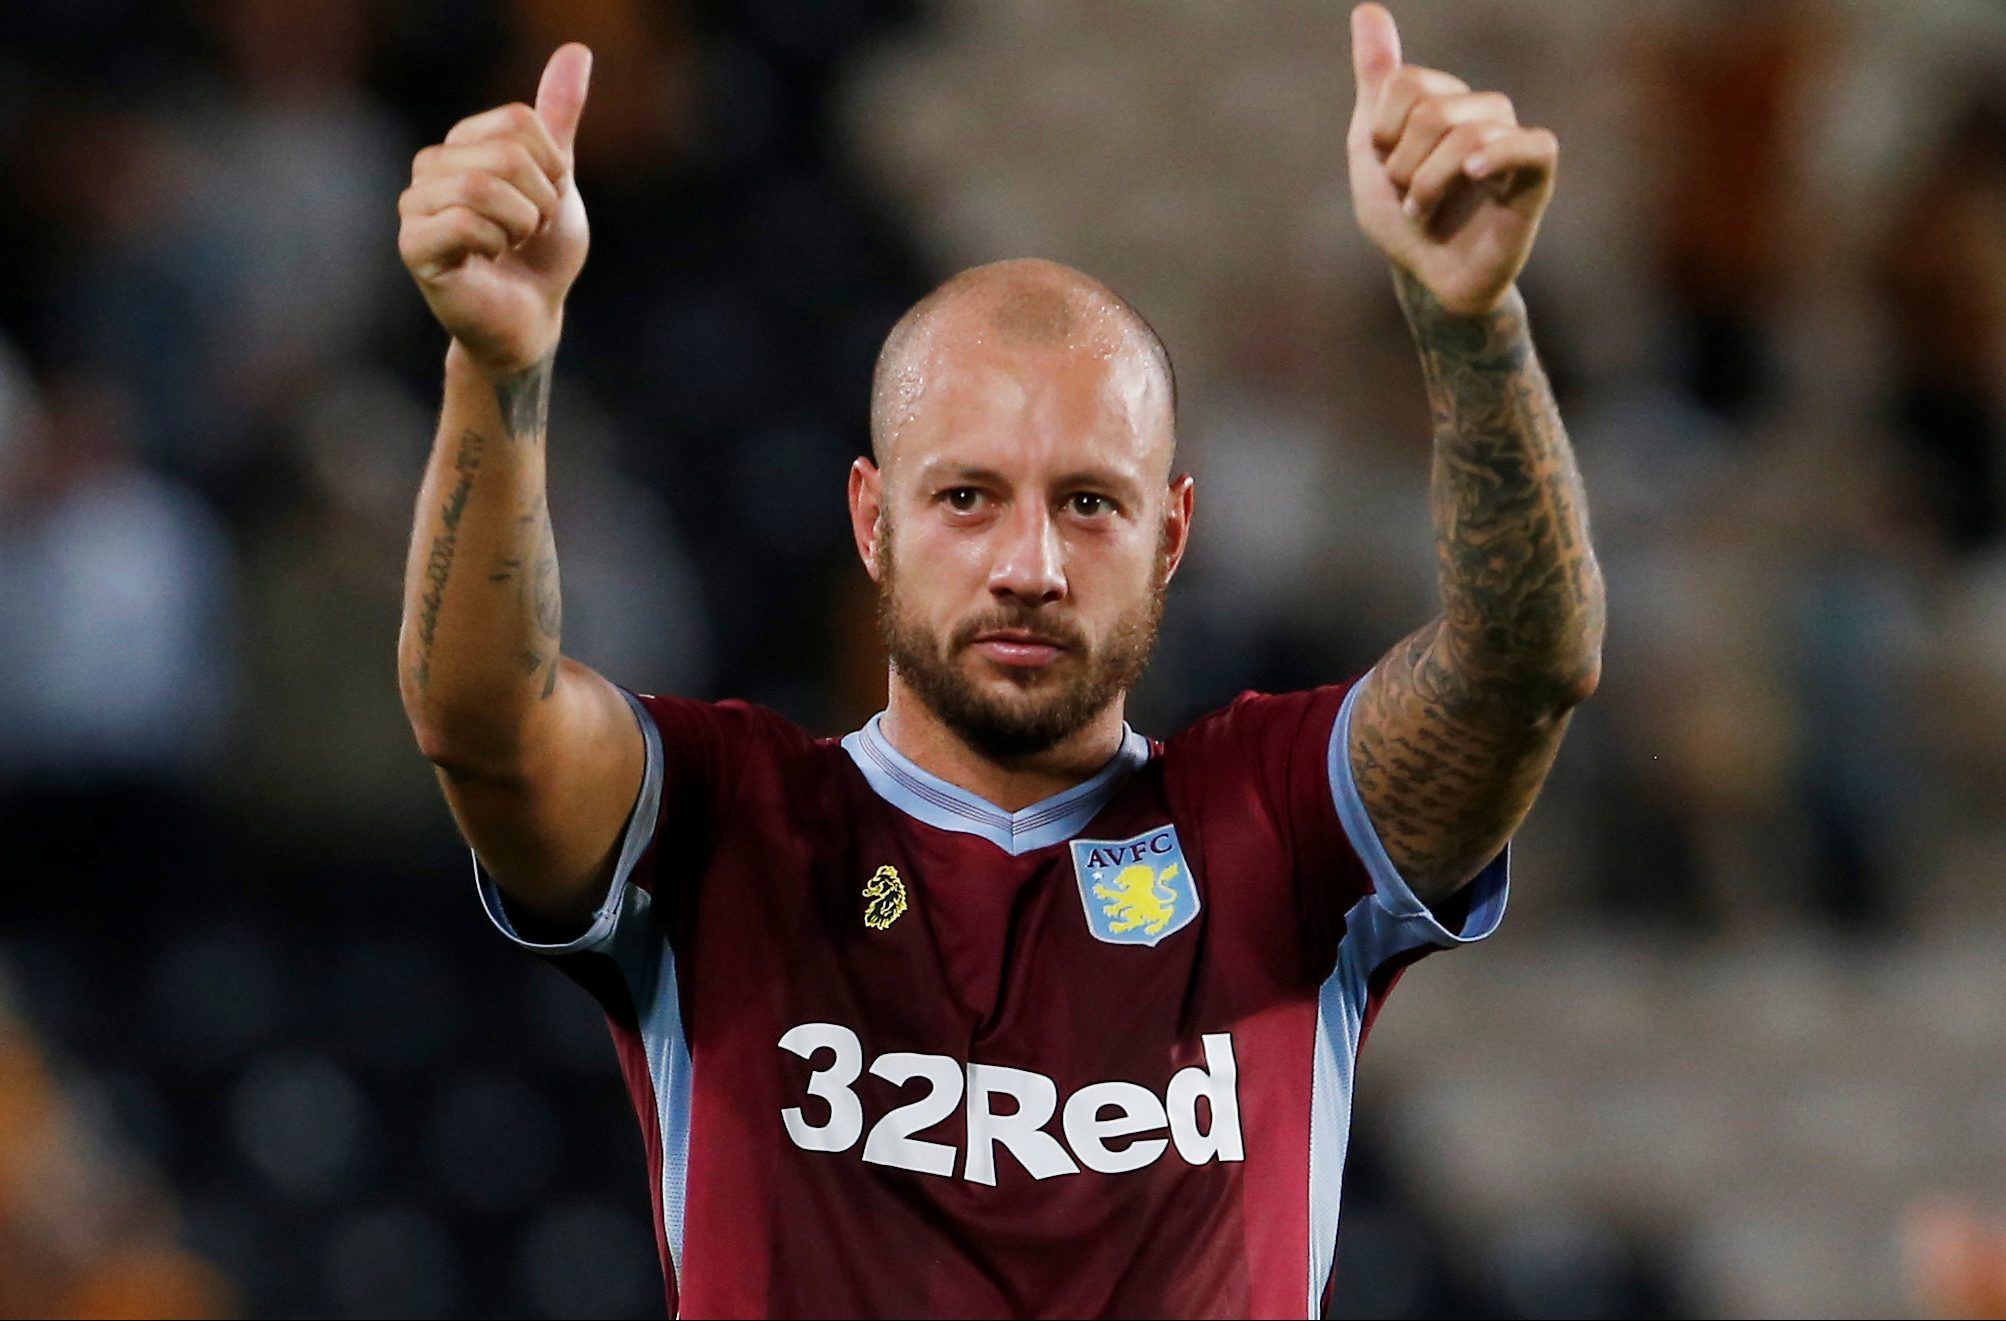 Soccer Football - Championship - Hull City v Aston Villa - KCOM Stadium, Hull, Britain - August 6, 2018   Aston Villa’s Alan Hutton gestures to fans after the match           Action Images/Craig Brough    EDITORIAL USE ONLY. No use with unauthorized audio, video, data, fixture lists, club/league logos or 